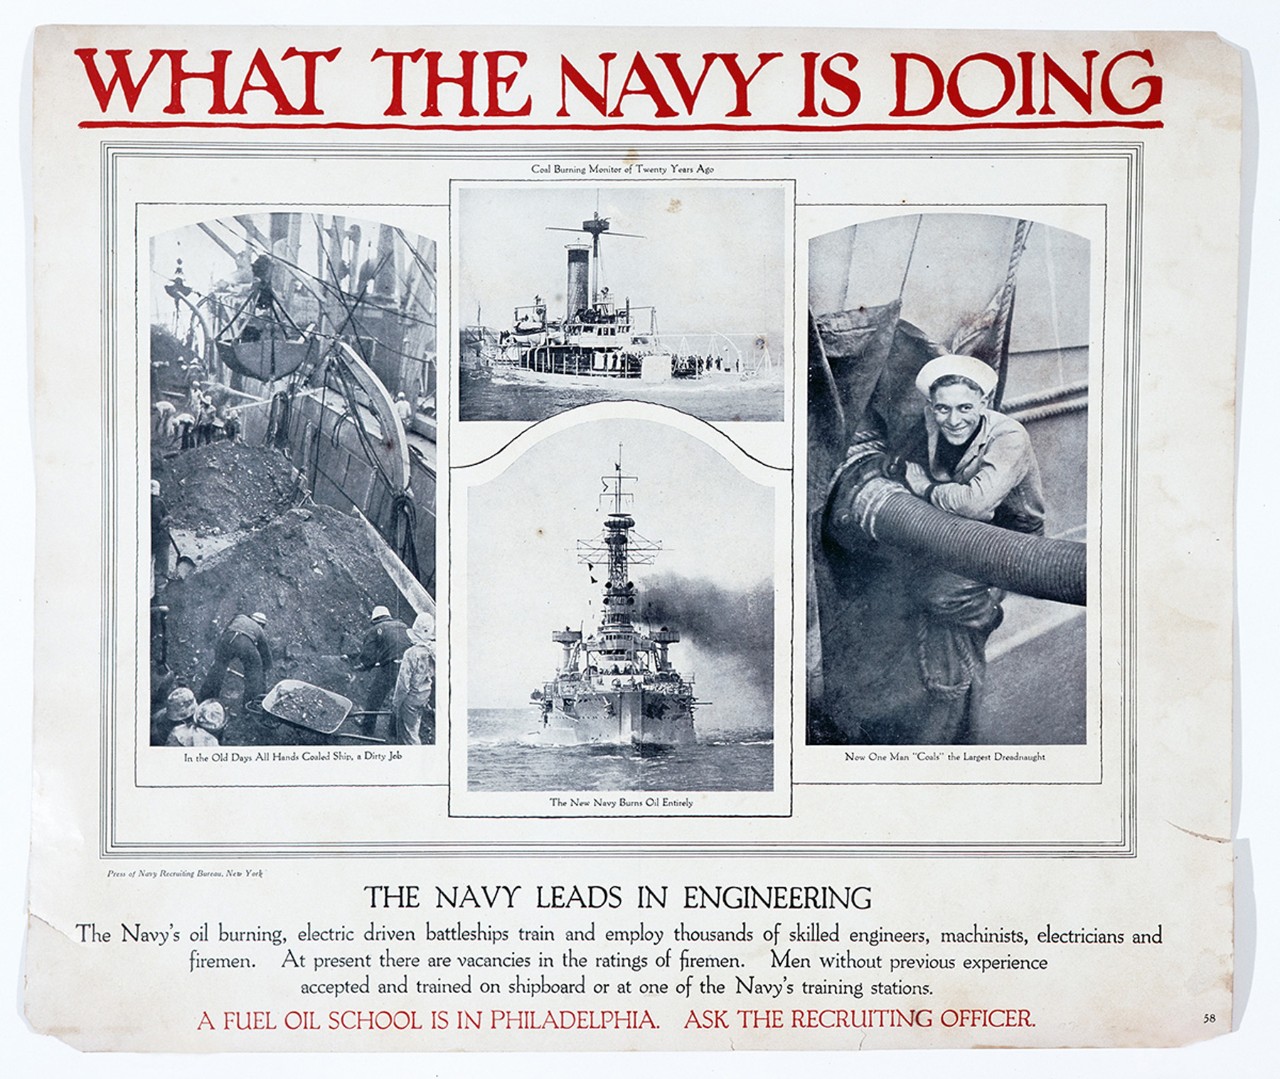 What the Navy is doing: The navy leads in engineering. The navy’s oil burning, electric driven battleships train and employ thousands of skilled engineers, machinists, electricians and firemen. At present there are vacancies in the ratings of firemen. Men without previous experience accepted and trained on shipboard or a one of the Navy’s training stations. A fuel oil school is in Philadelphia. Ask the recruiting officer.